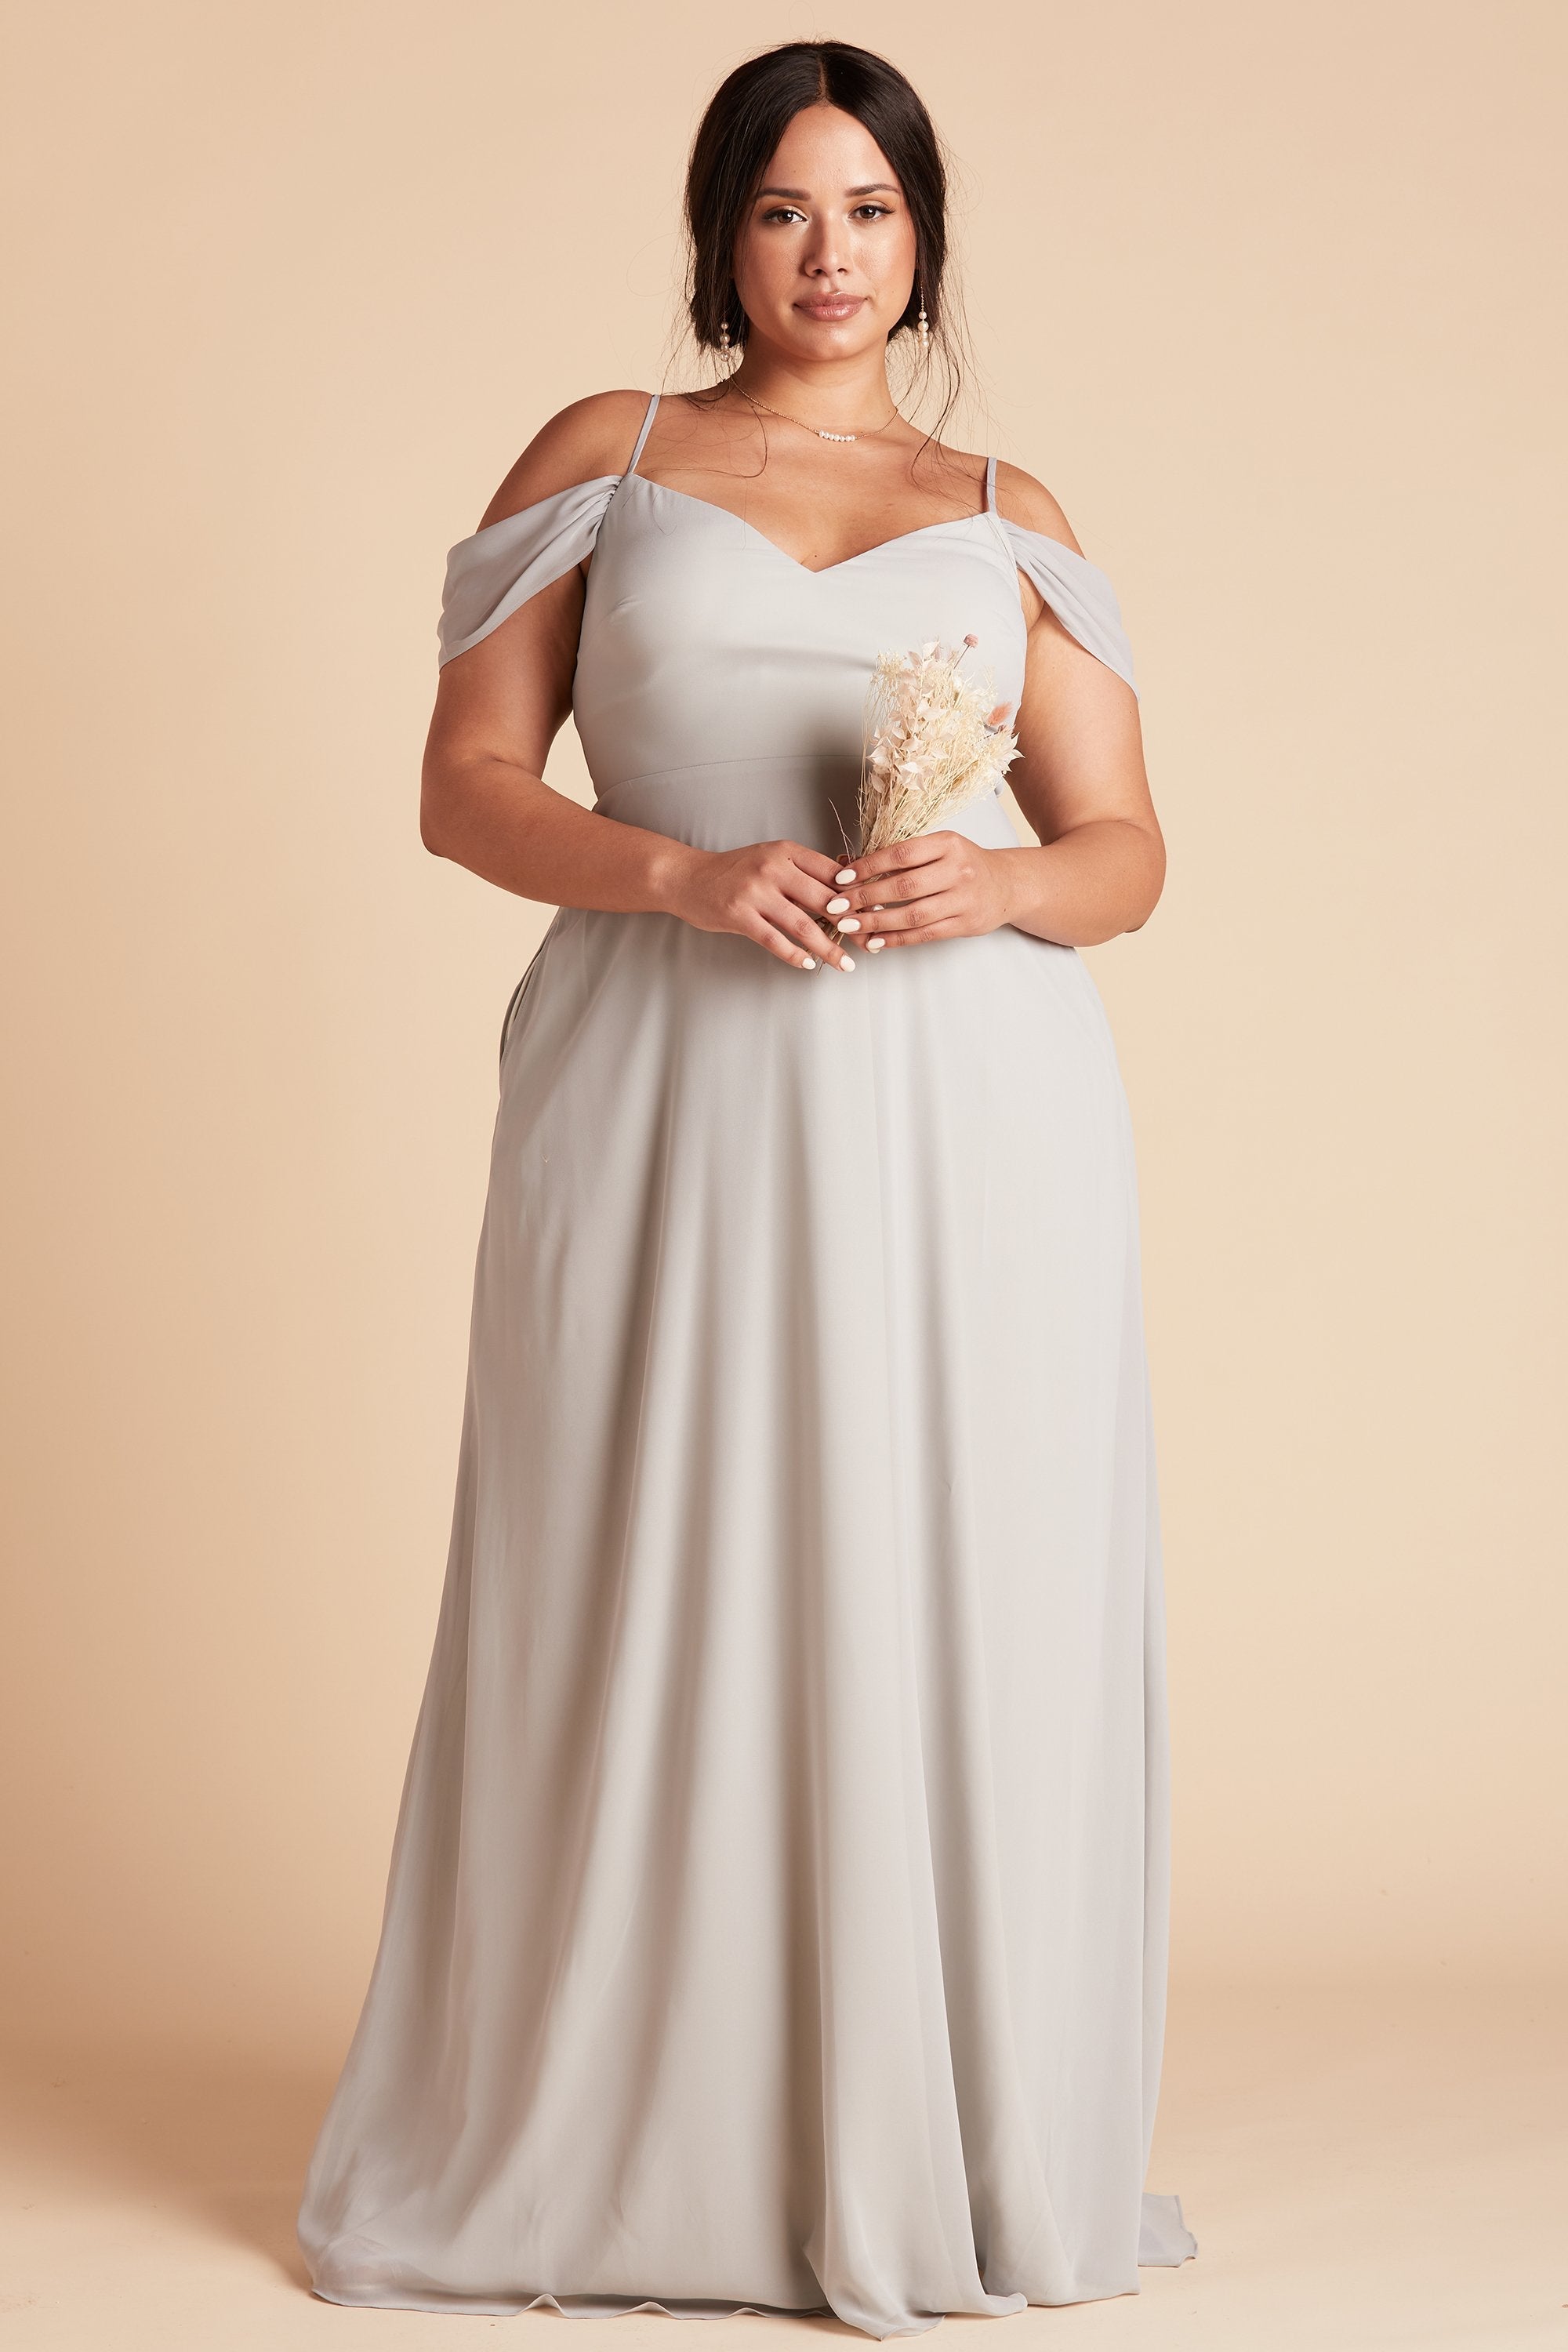 Devin convertible plus size bridesmaid dress in dove gray chiffon by Birdy Grey, front view